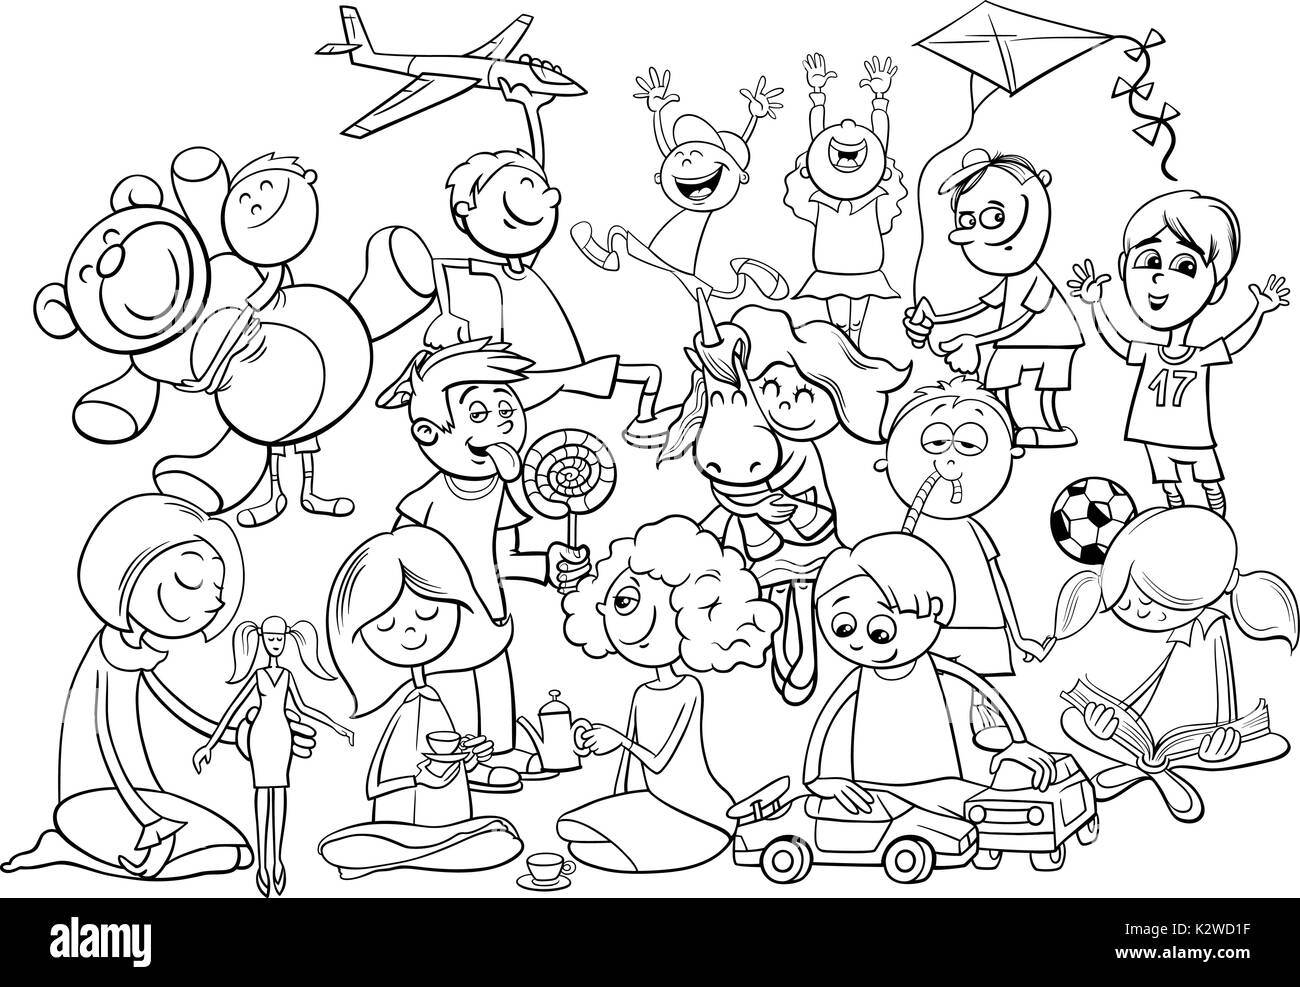 Black and White Cartoon Illustration of Children Characters Group Playing with Toys Coloring Book Stock Vector